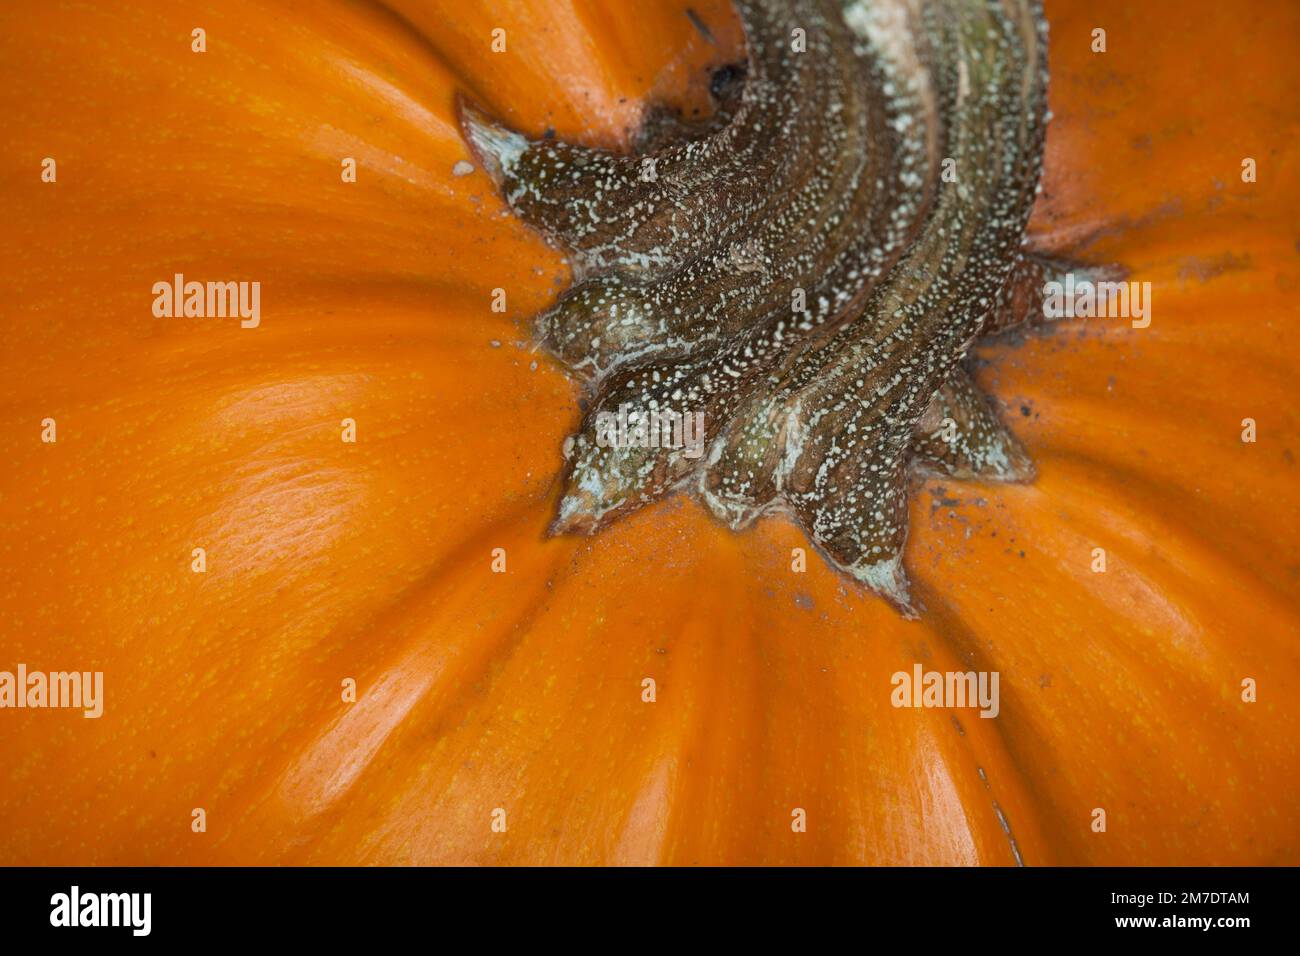 Close up detail of the stalk and thick orange skin of a pumpkin. Stock Photo